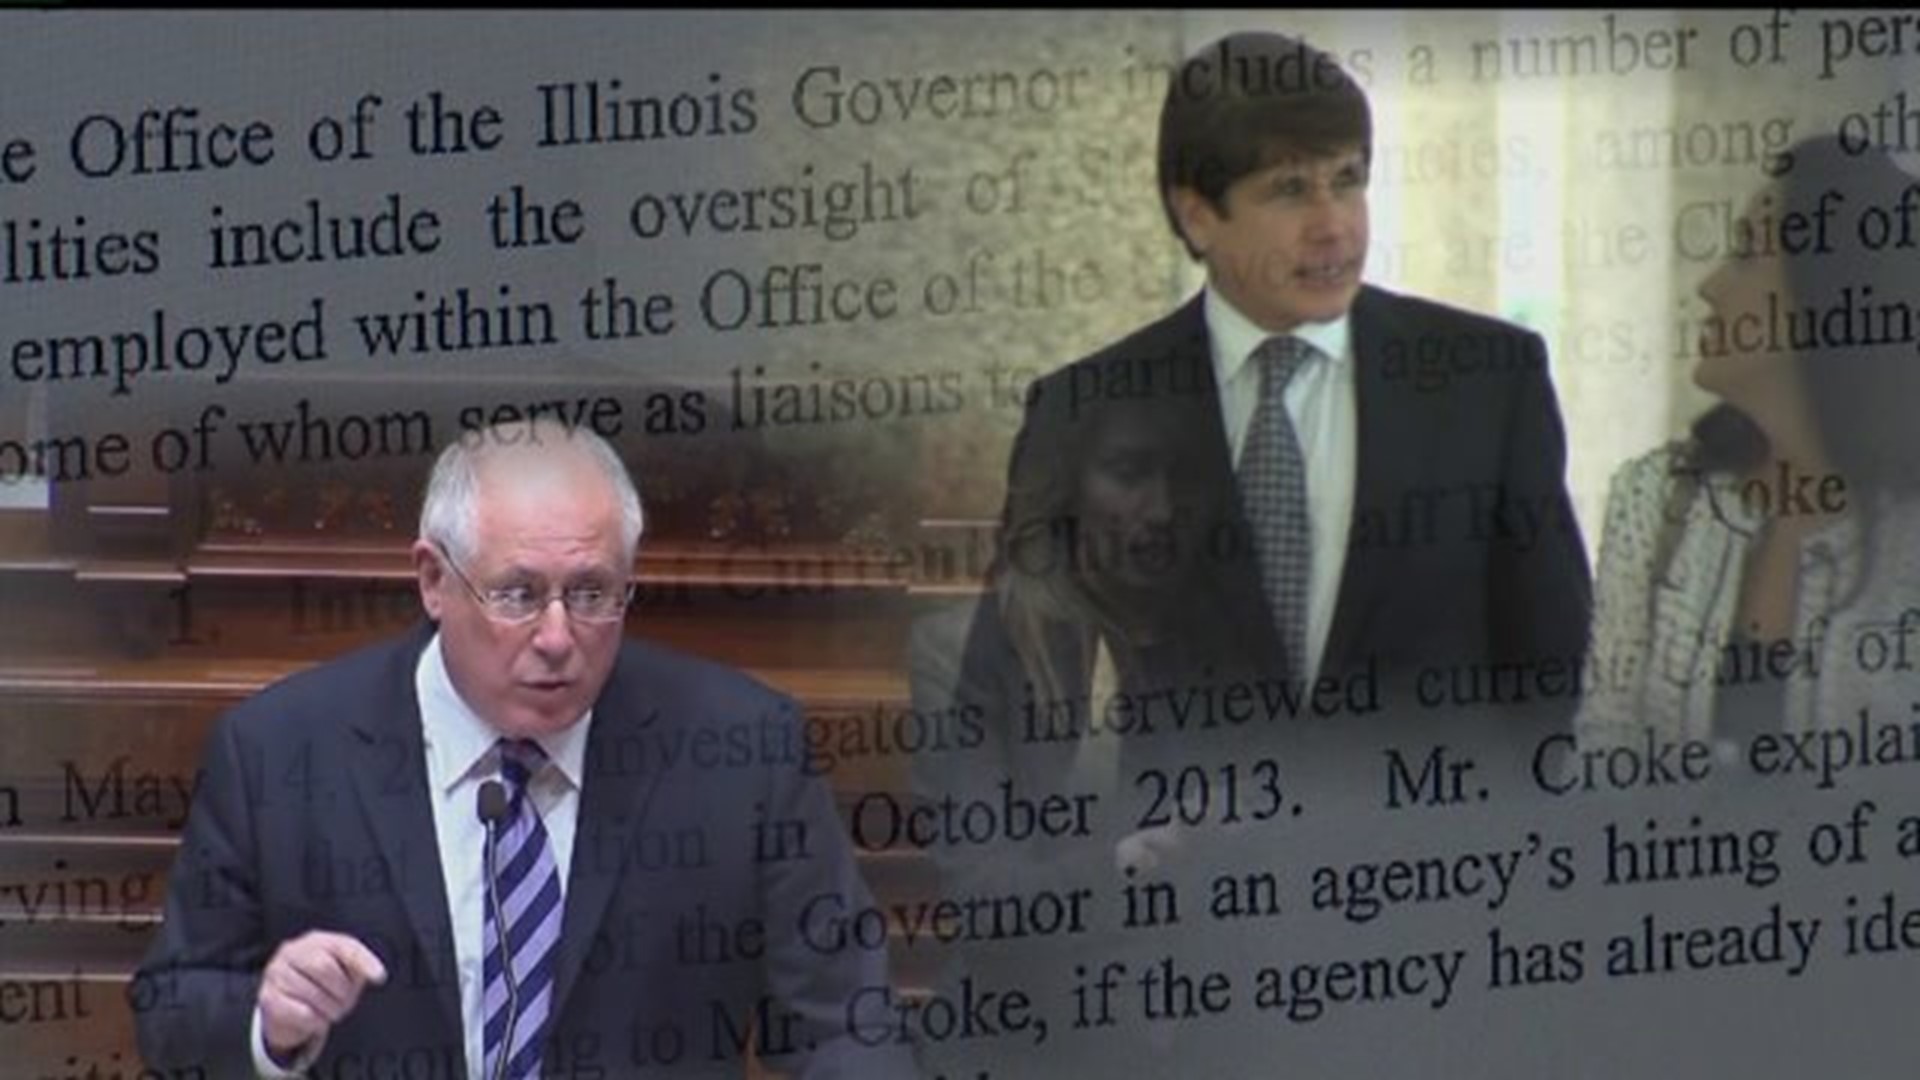 News 8 fact checks attack ad against Governor Pat Quinn